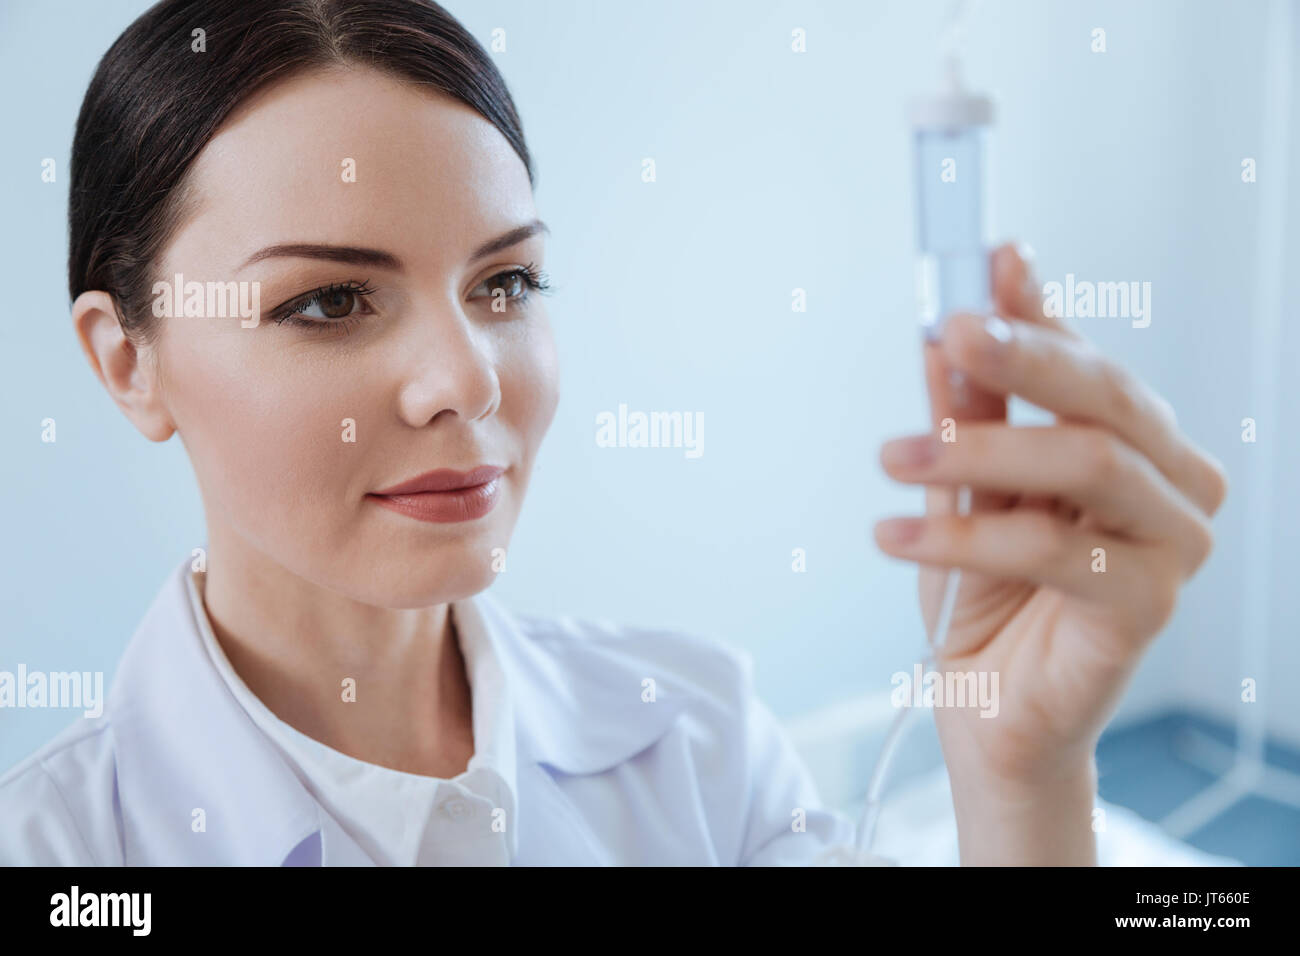 Pleasant professional nurse looking at the IV drip bottle Stock Photo